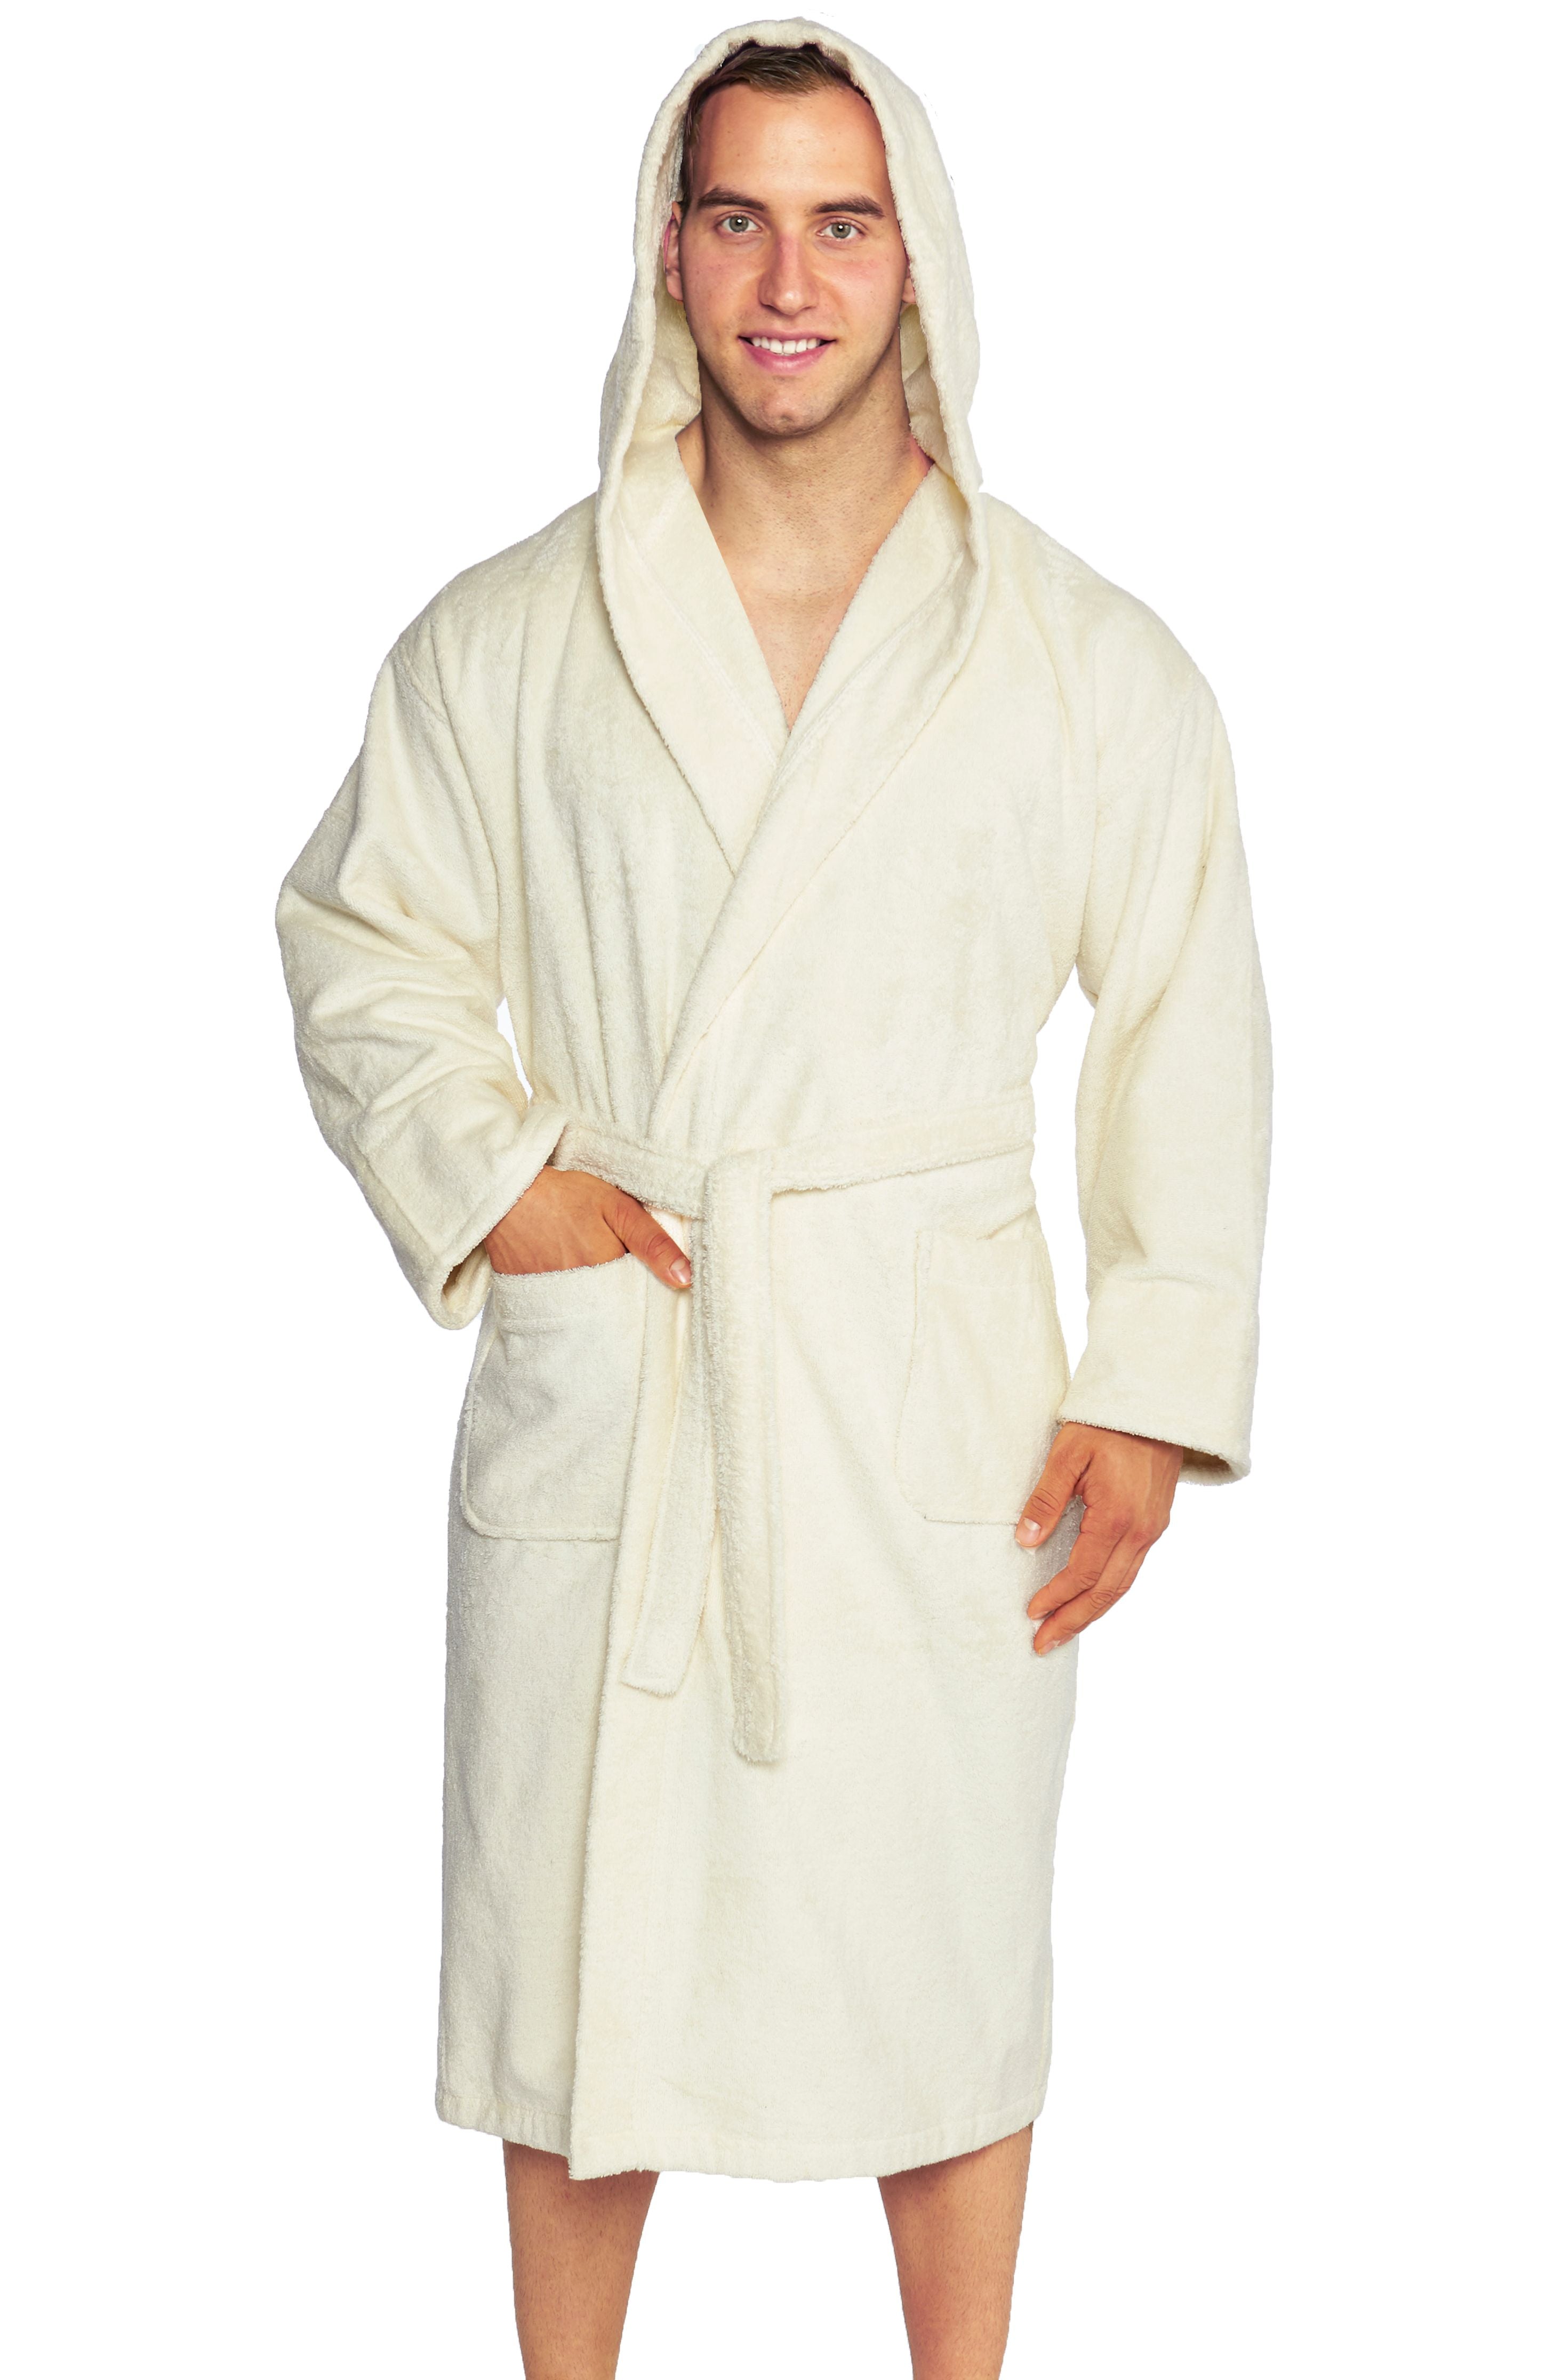 Buy Soft and Fluffy Hooded Terry Bathrobe Online | Turkish Towels